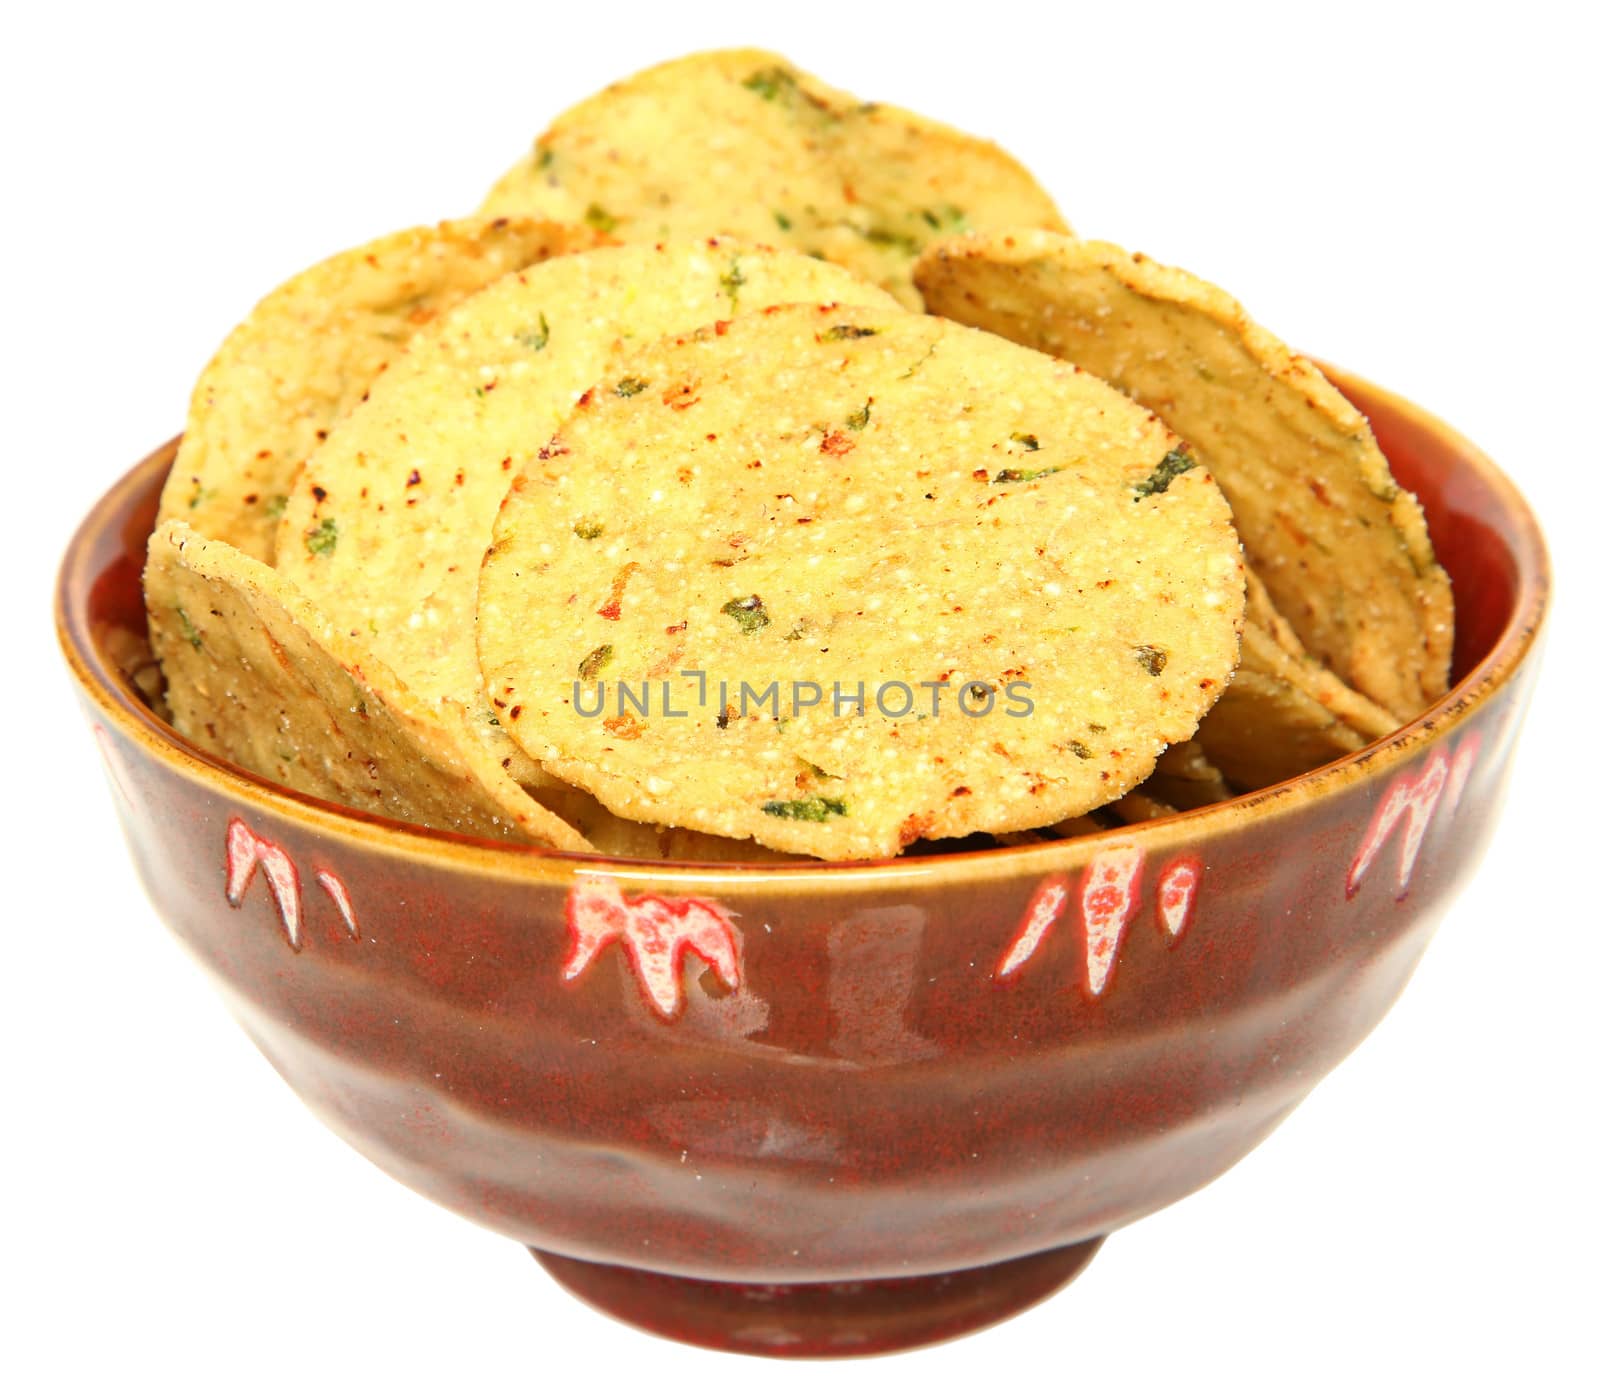 Gluten Free Jalapeno Corn Chips in Bowl Over White